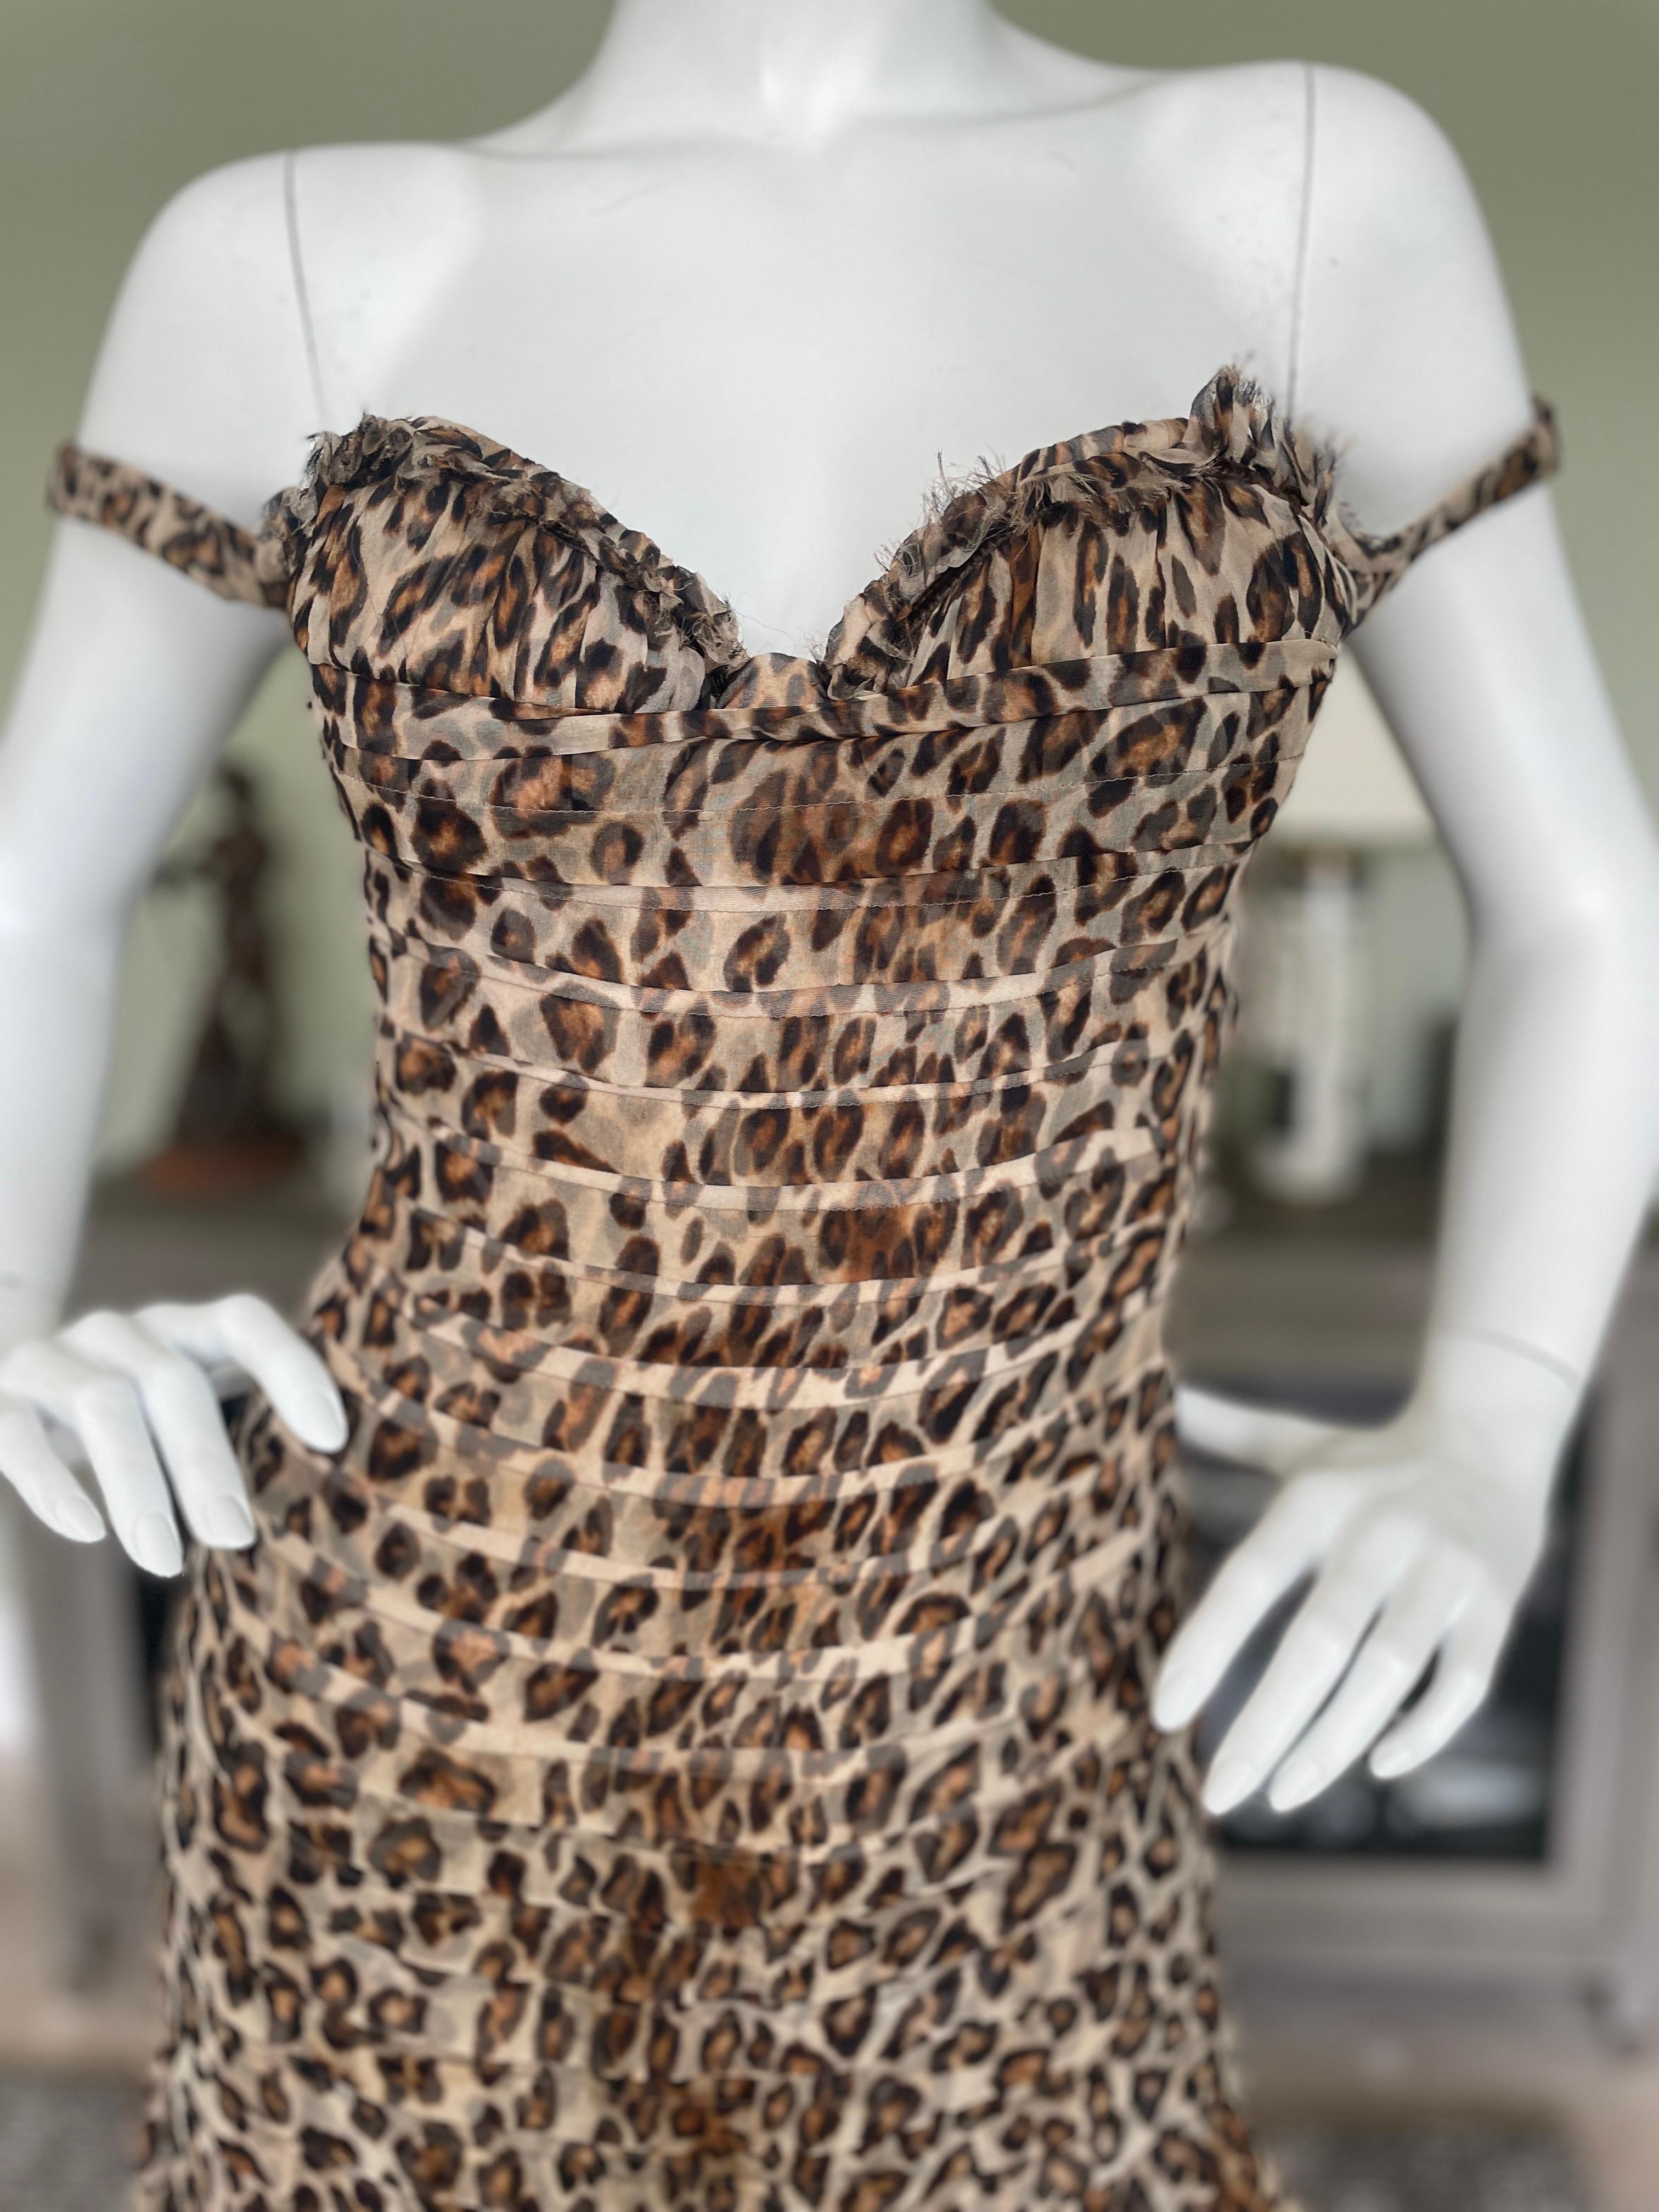 Alexander McQueen 2005 Leopard Print Cocktail Dress with Inner Corset In Excellent Condition For Sale In Cloverdale, CA